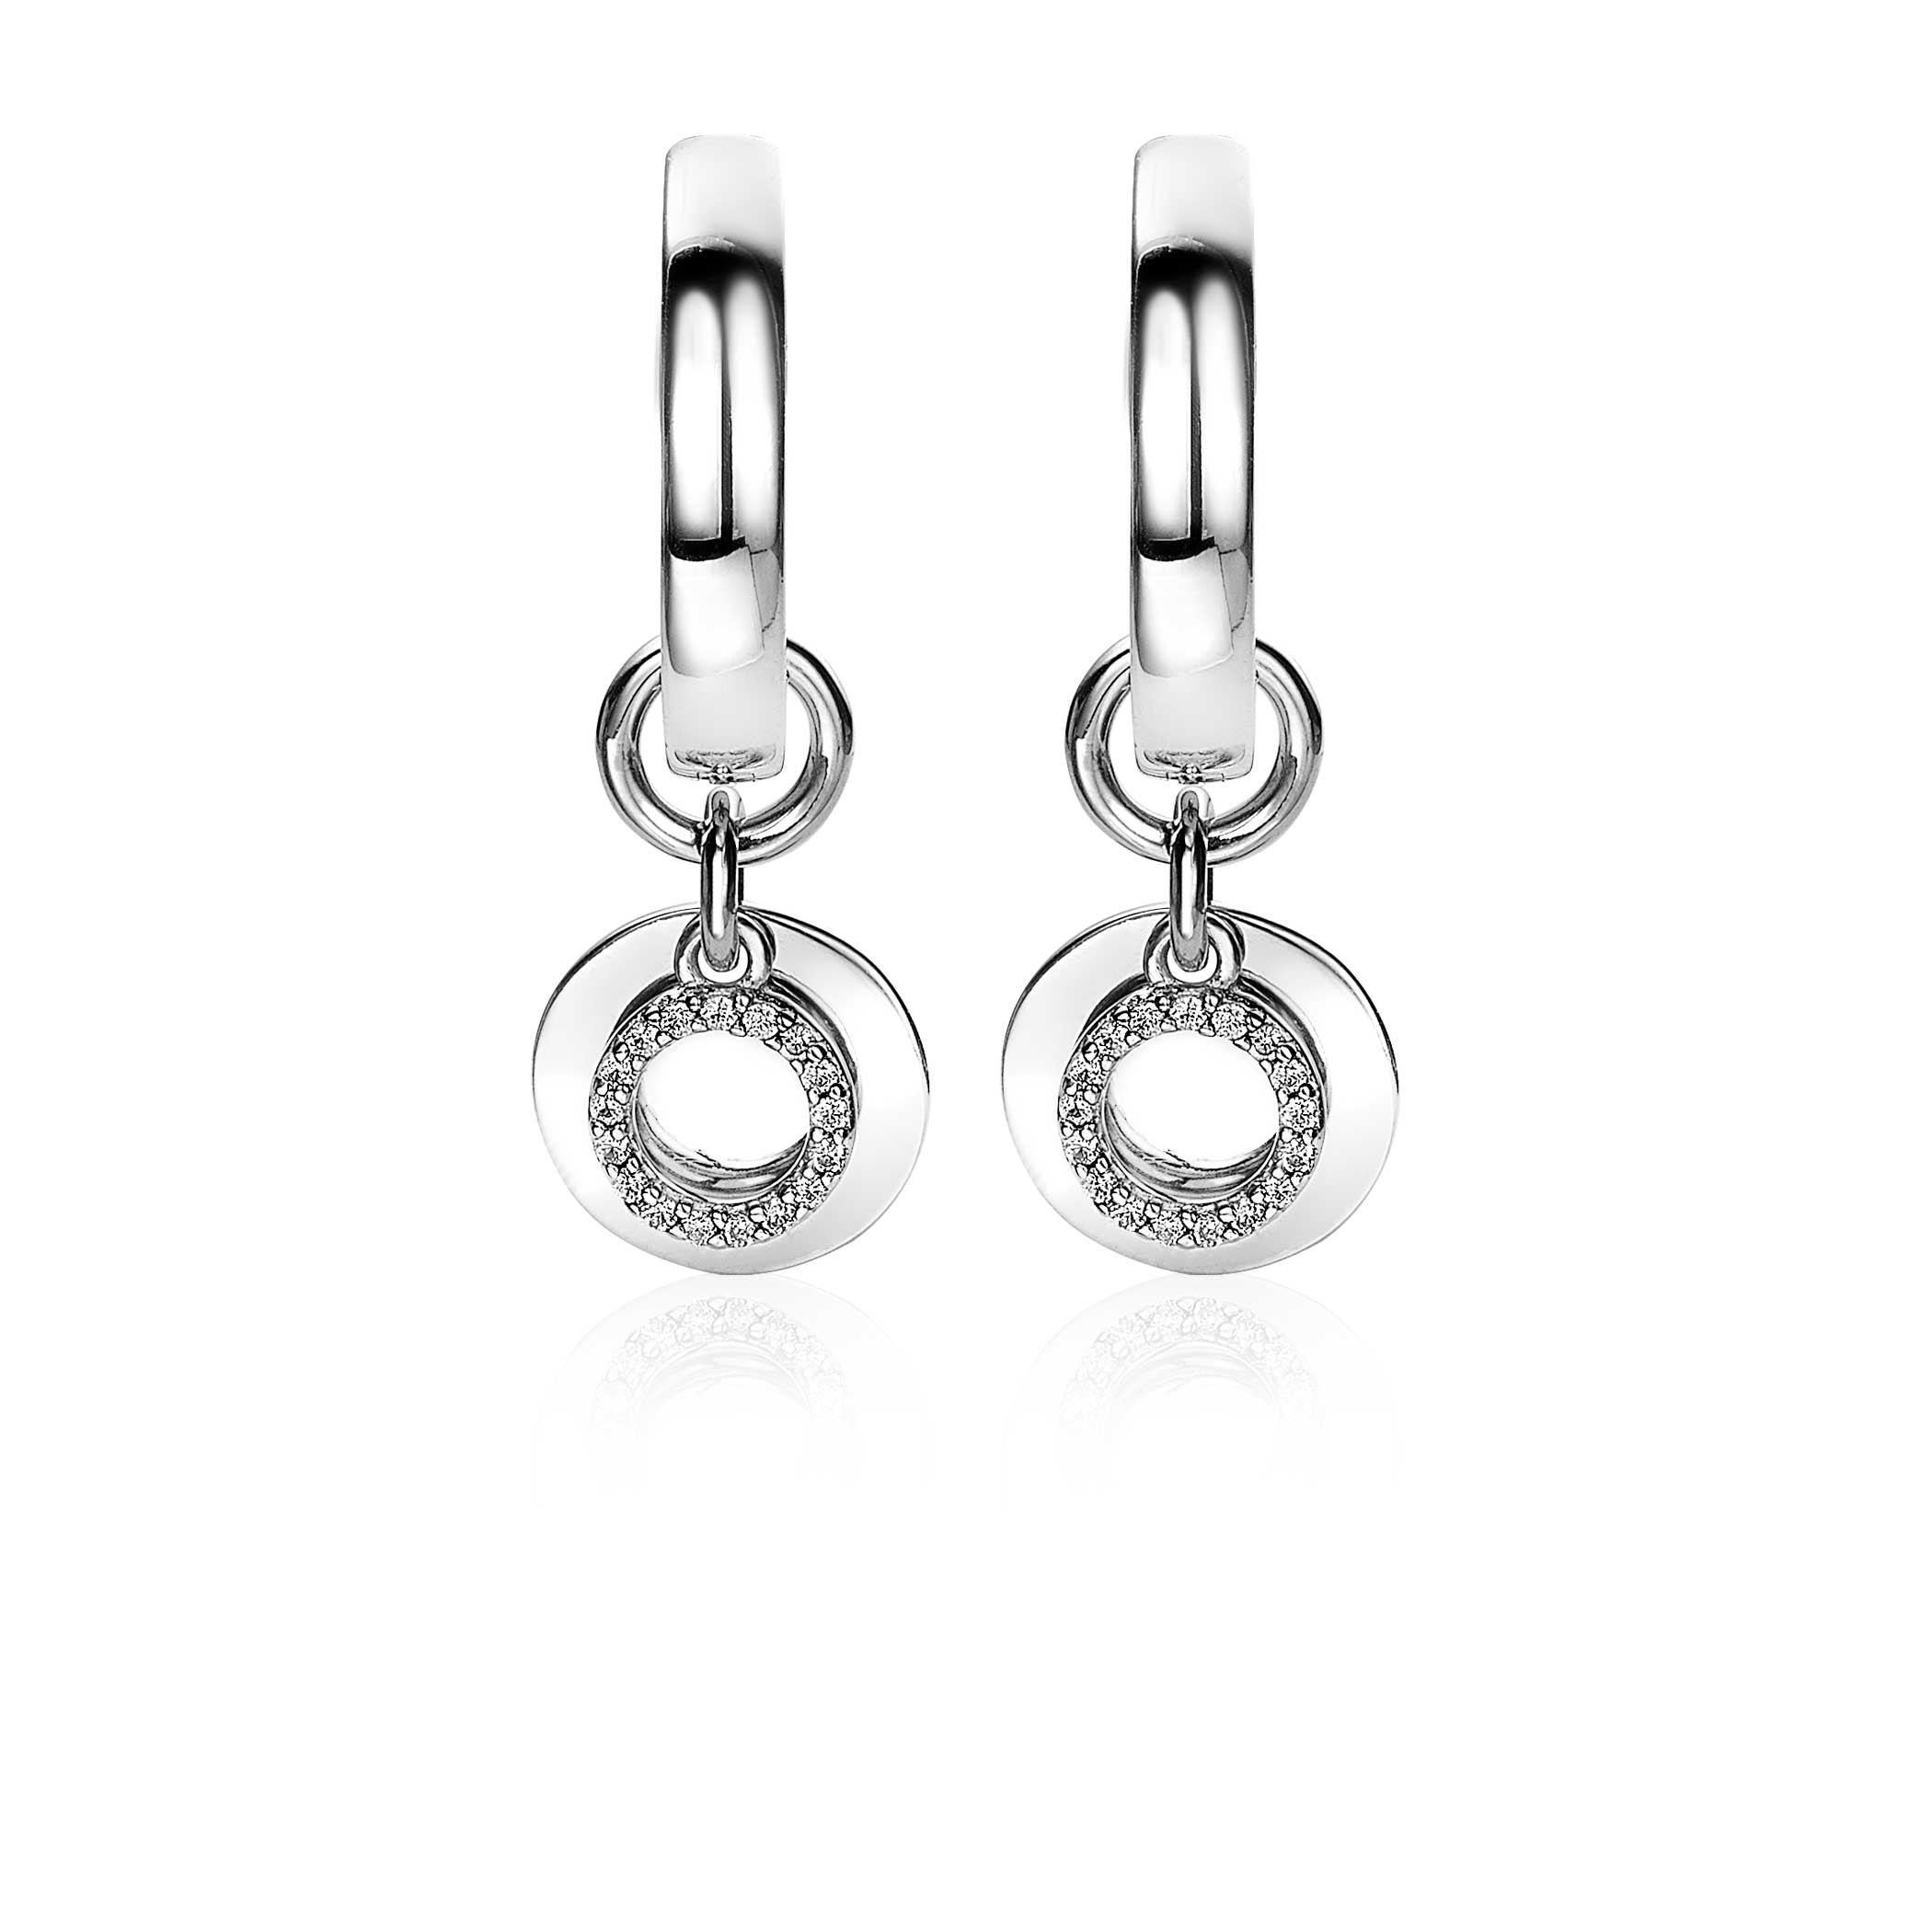 ZINZI Sterling Silver Earrings Pendants Coin and Open Circle White ZICH1769 (excl. hoop earrings)